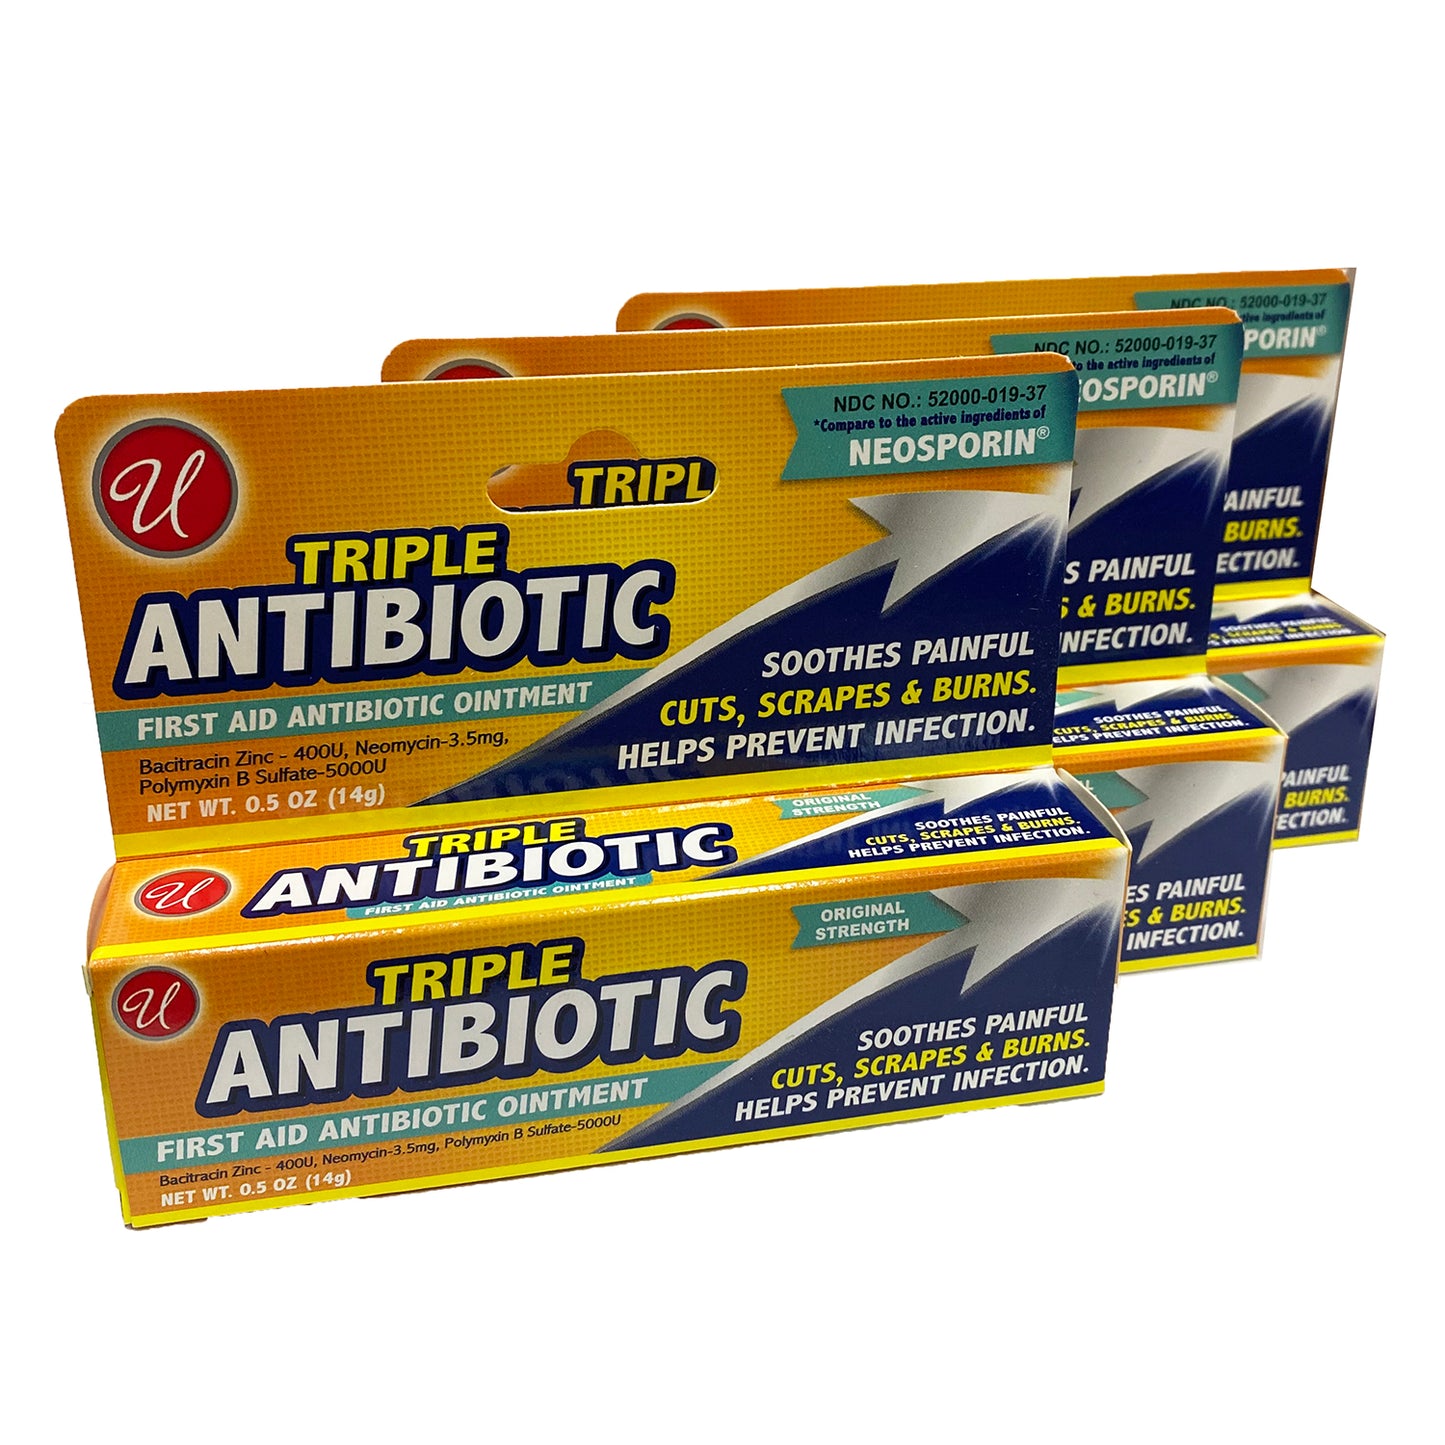 Triple Antibiotic First Aid Ointment 0.5 oz (14g) "3-PACK"